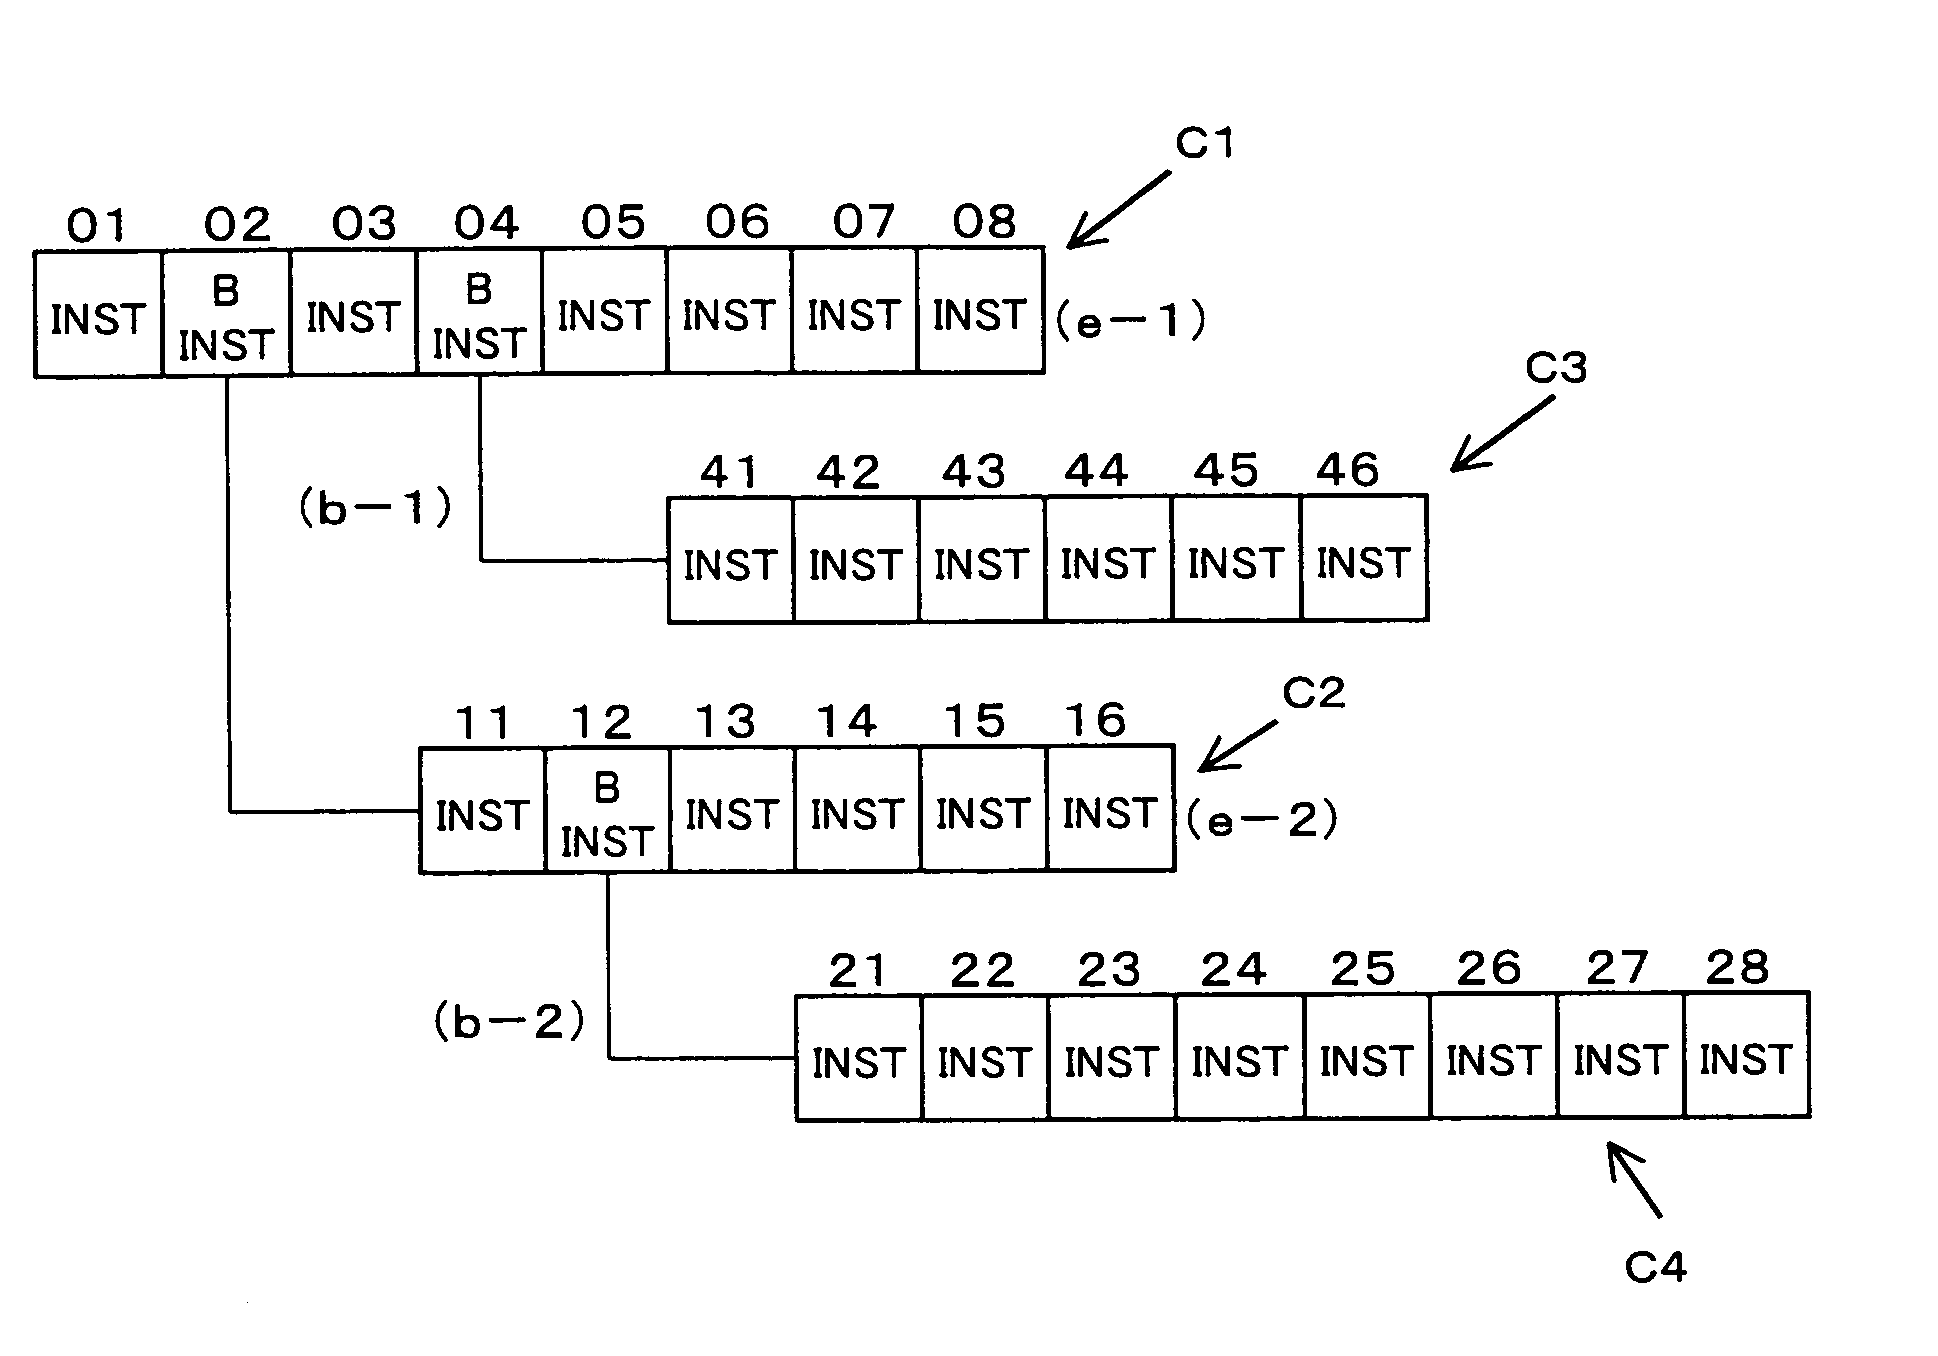 Processing device for buffering sequential and target sequences and target address information for multiple branch instructions